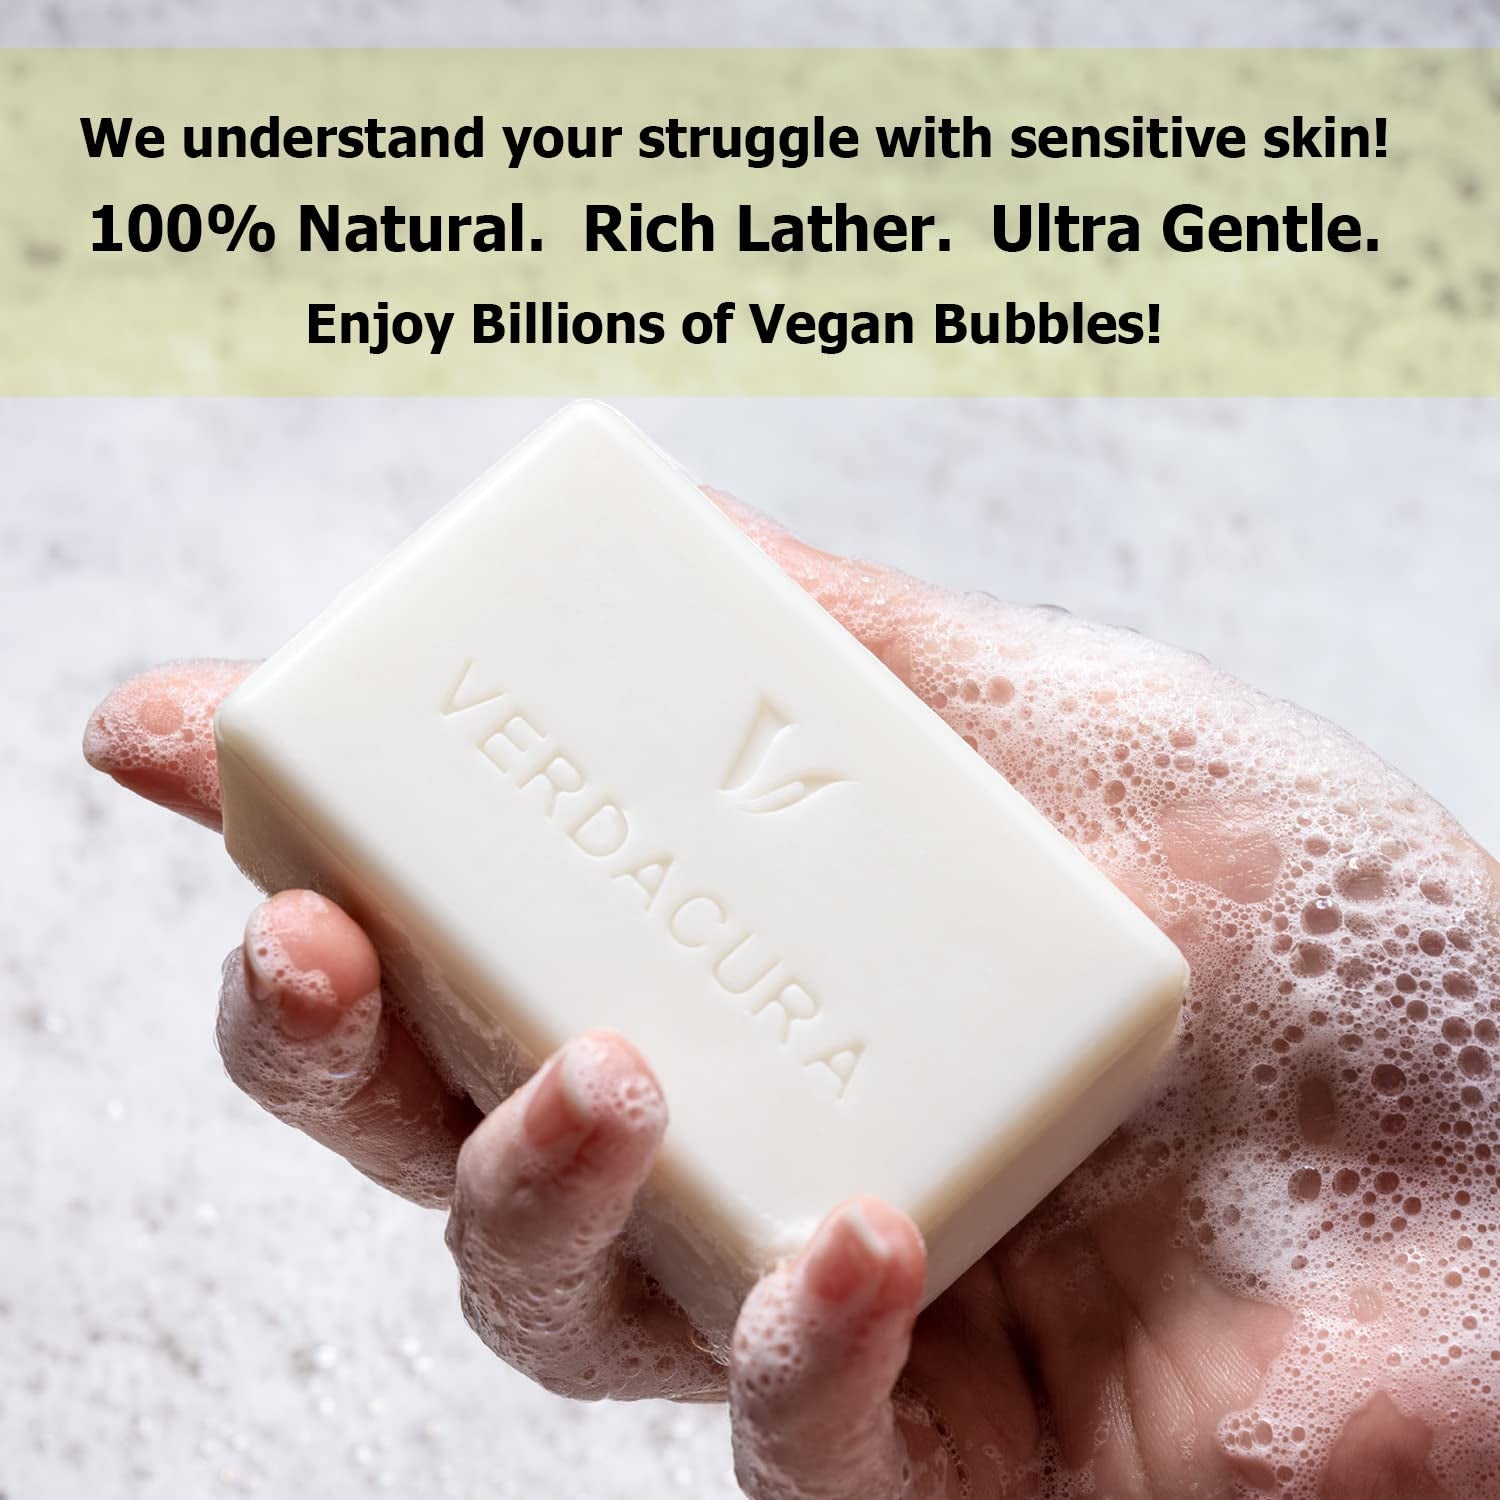 Pure Castile Bar Soap for Face Body and Hands All Natural Vegan Soap Ultra-Gentle Biodegradable Sustainable Cruelty Free Palm Oil Free Suitable for Sensitive Skin Made in USA (Peppermint 4.5 Ounce,3 Pack)